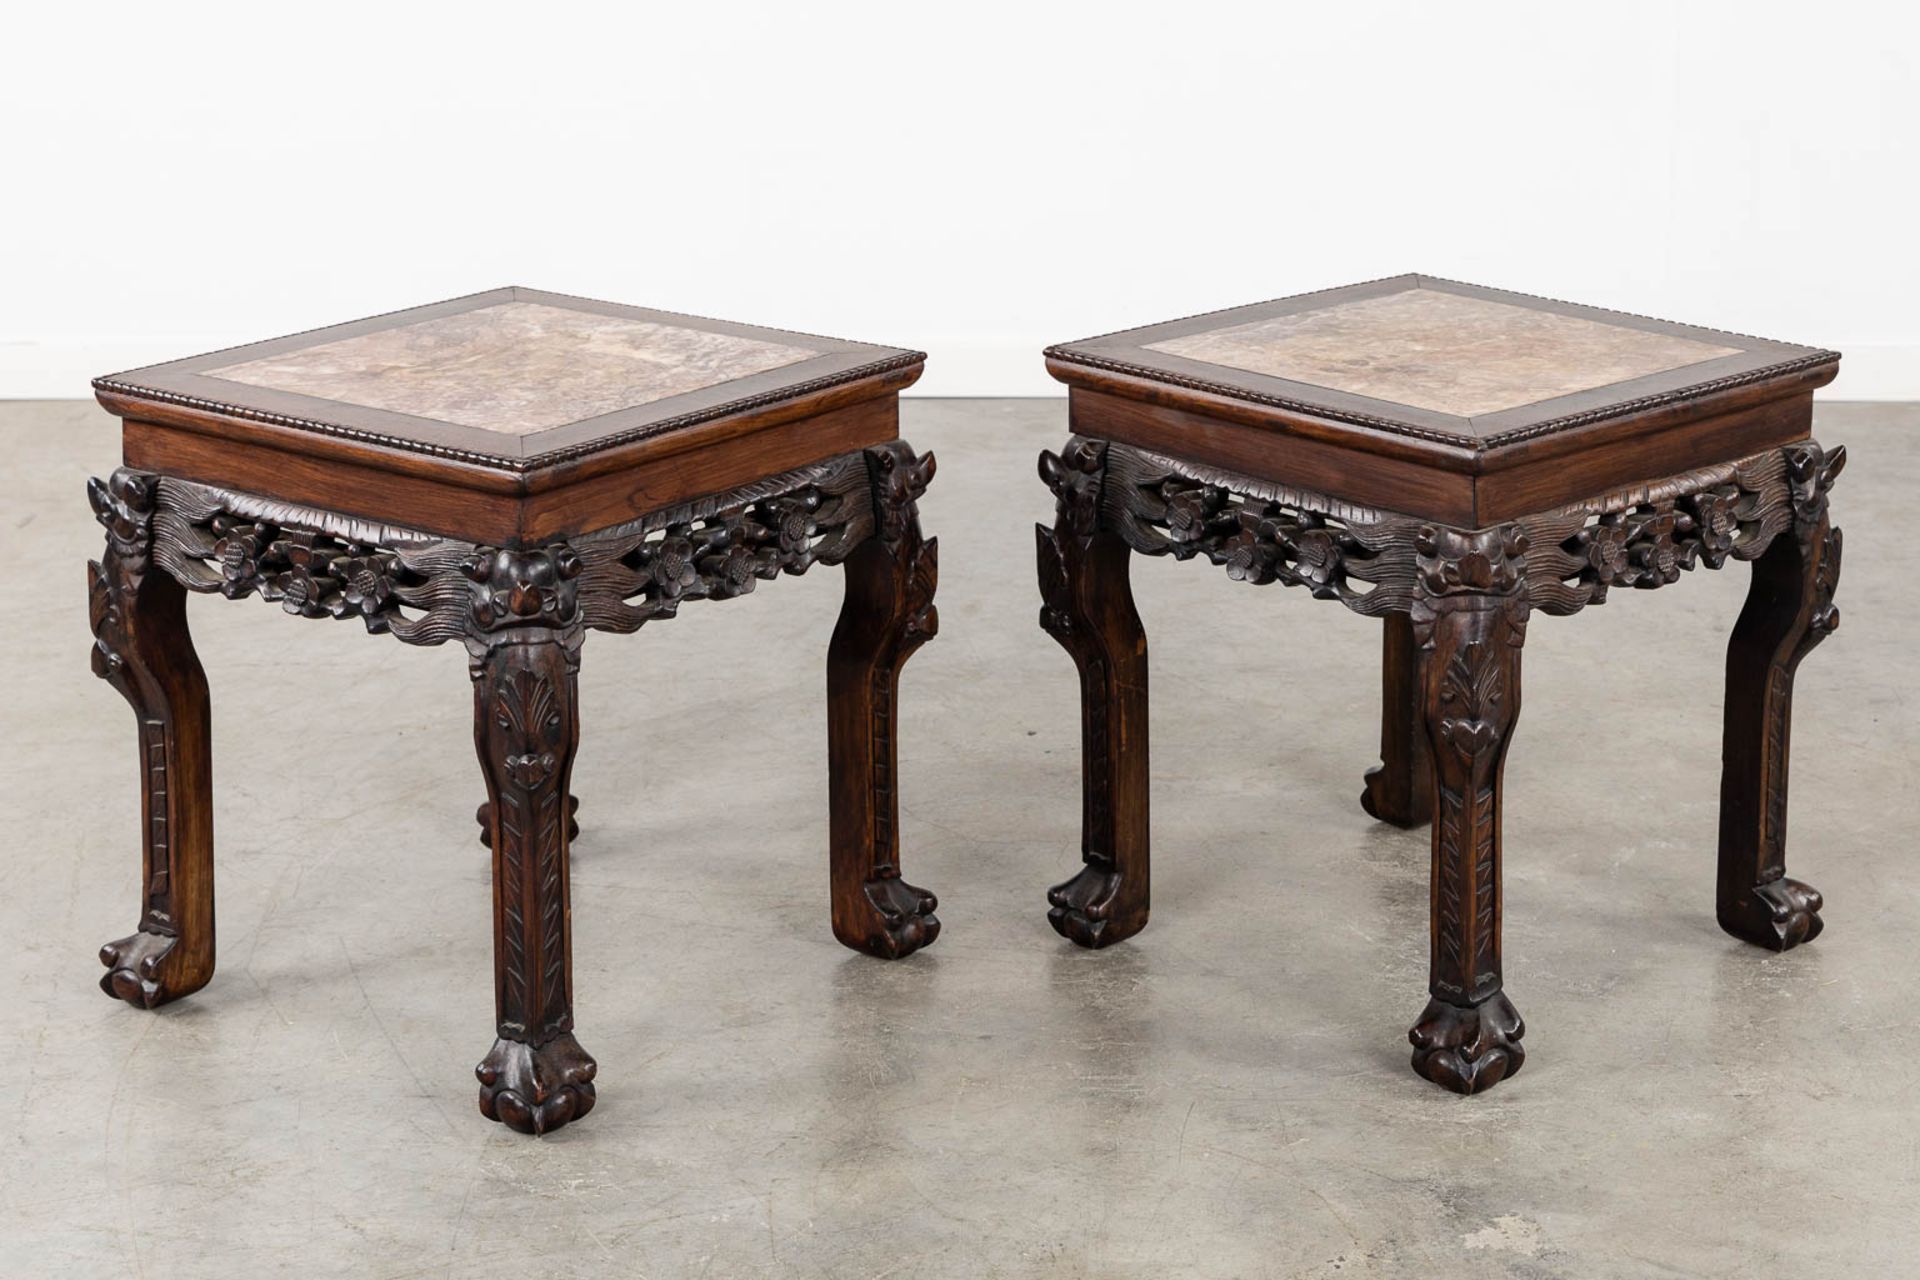 A pair of square Chinese side tables, hardwood with a marble top. (L:44 x W:44 x H:46 cm) - Bild 7 aus 11